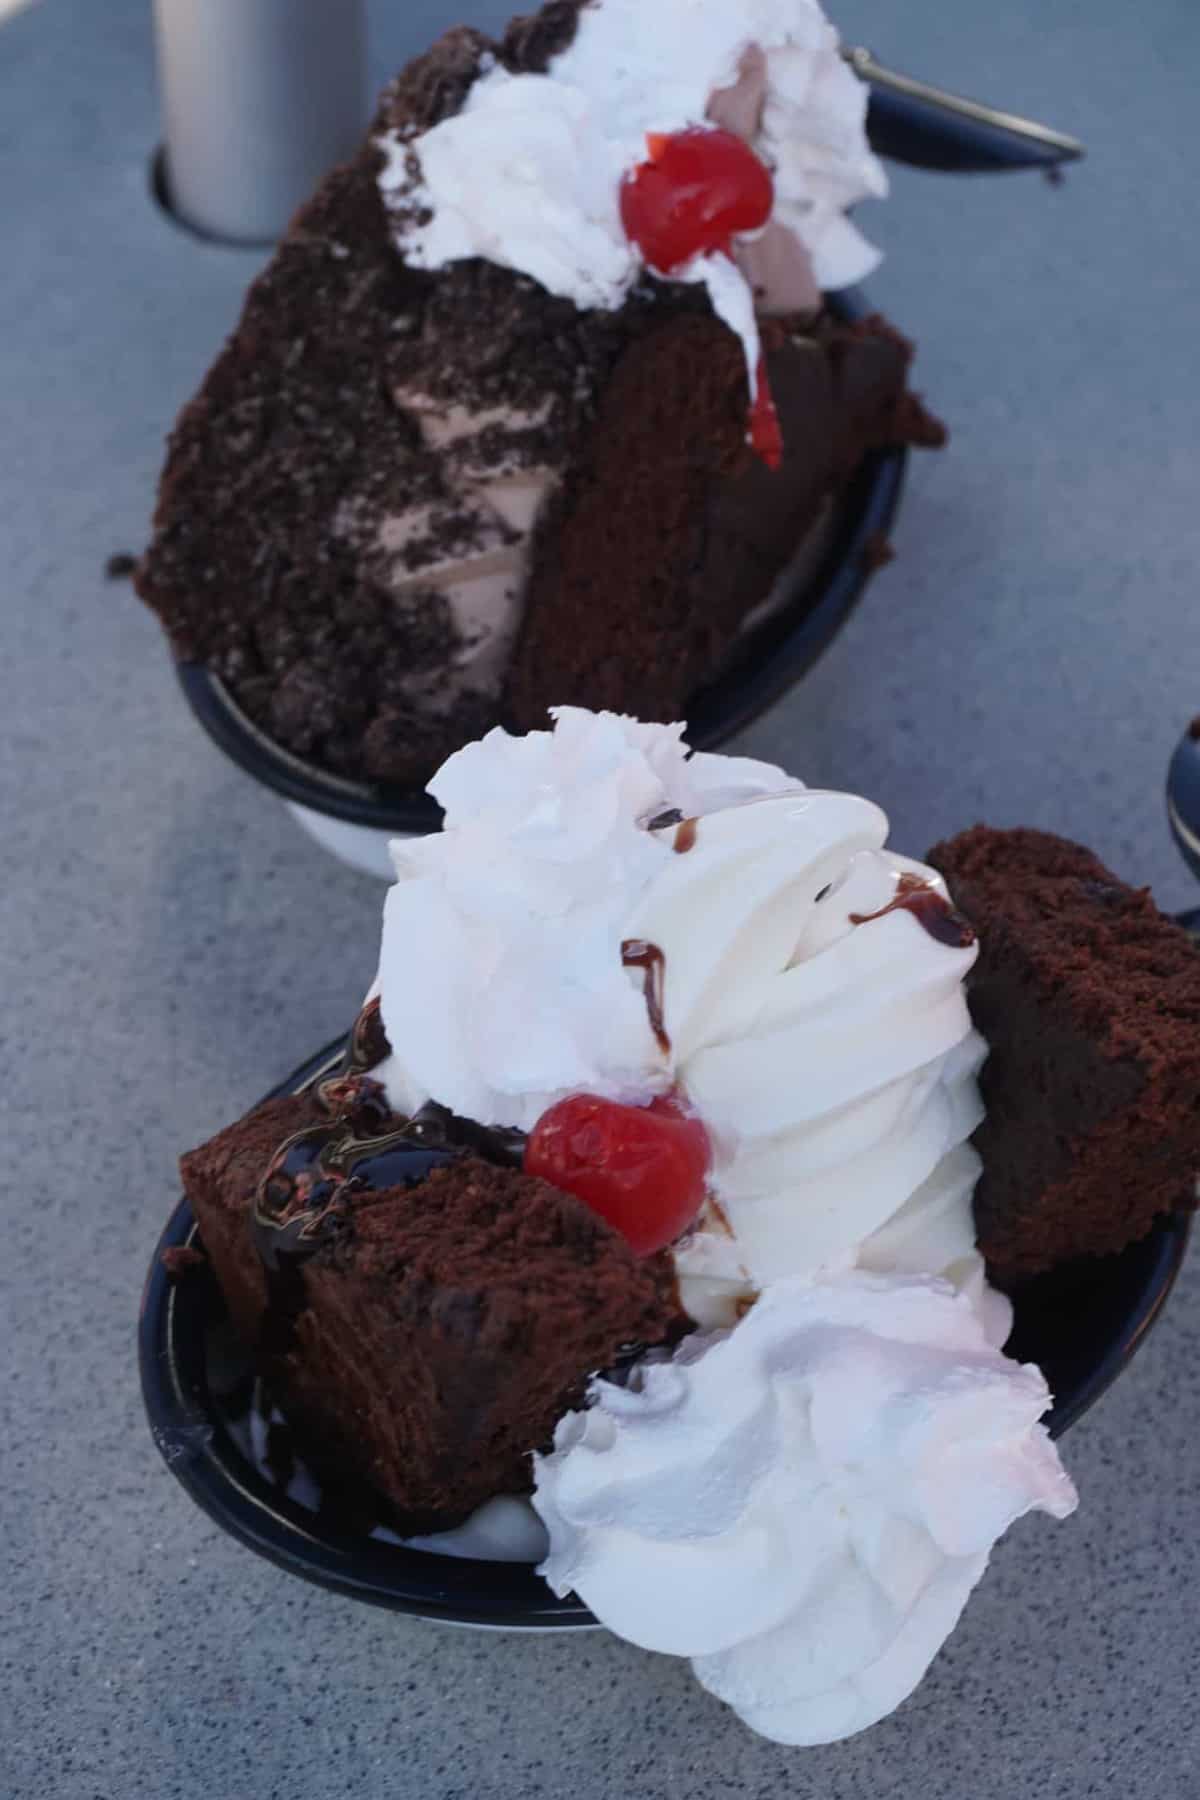 brownie ice cream sundaes with cherry on top at seaworld